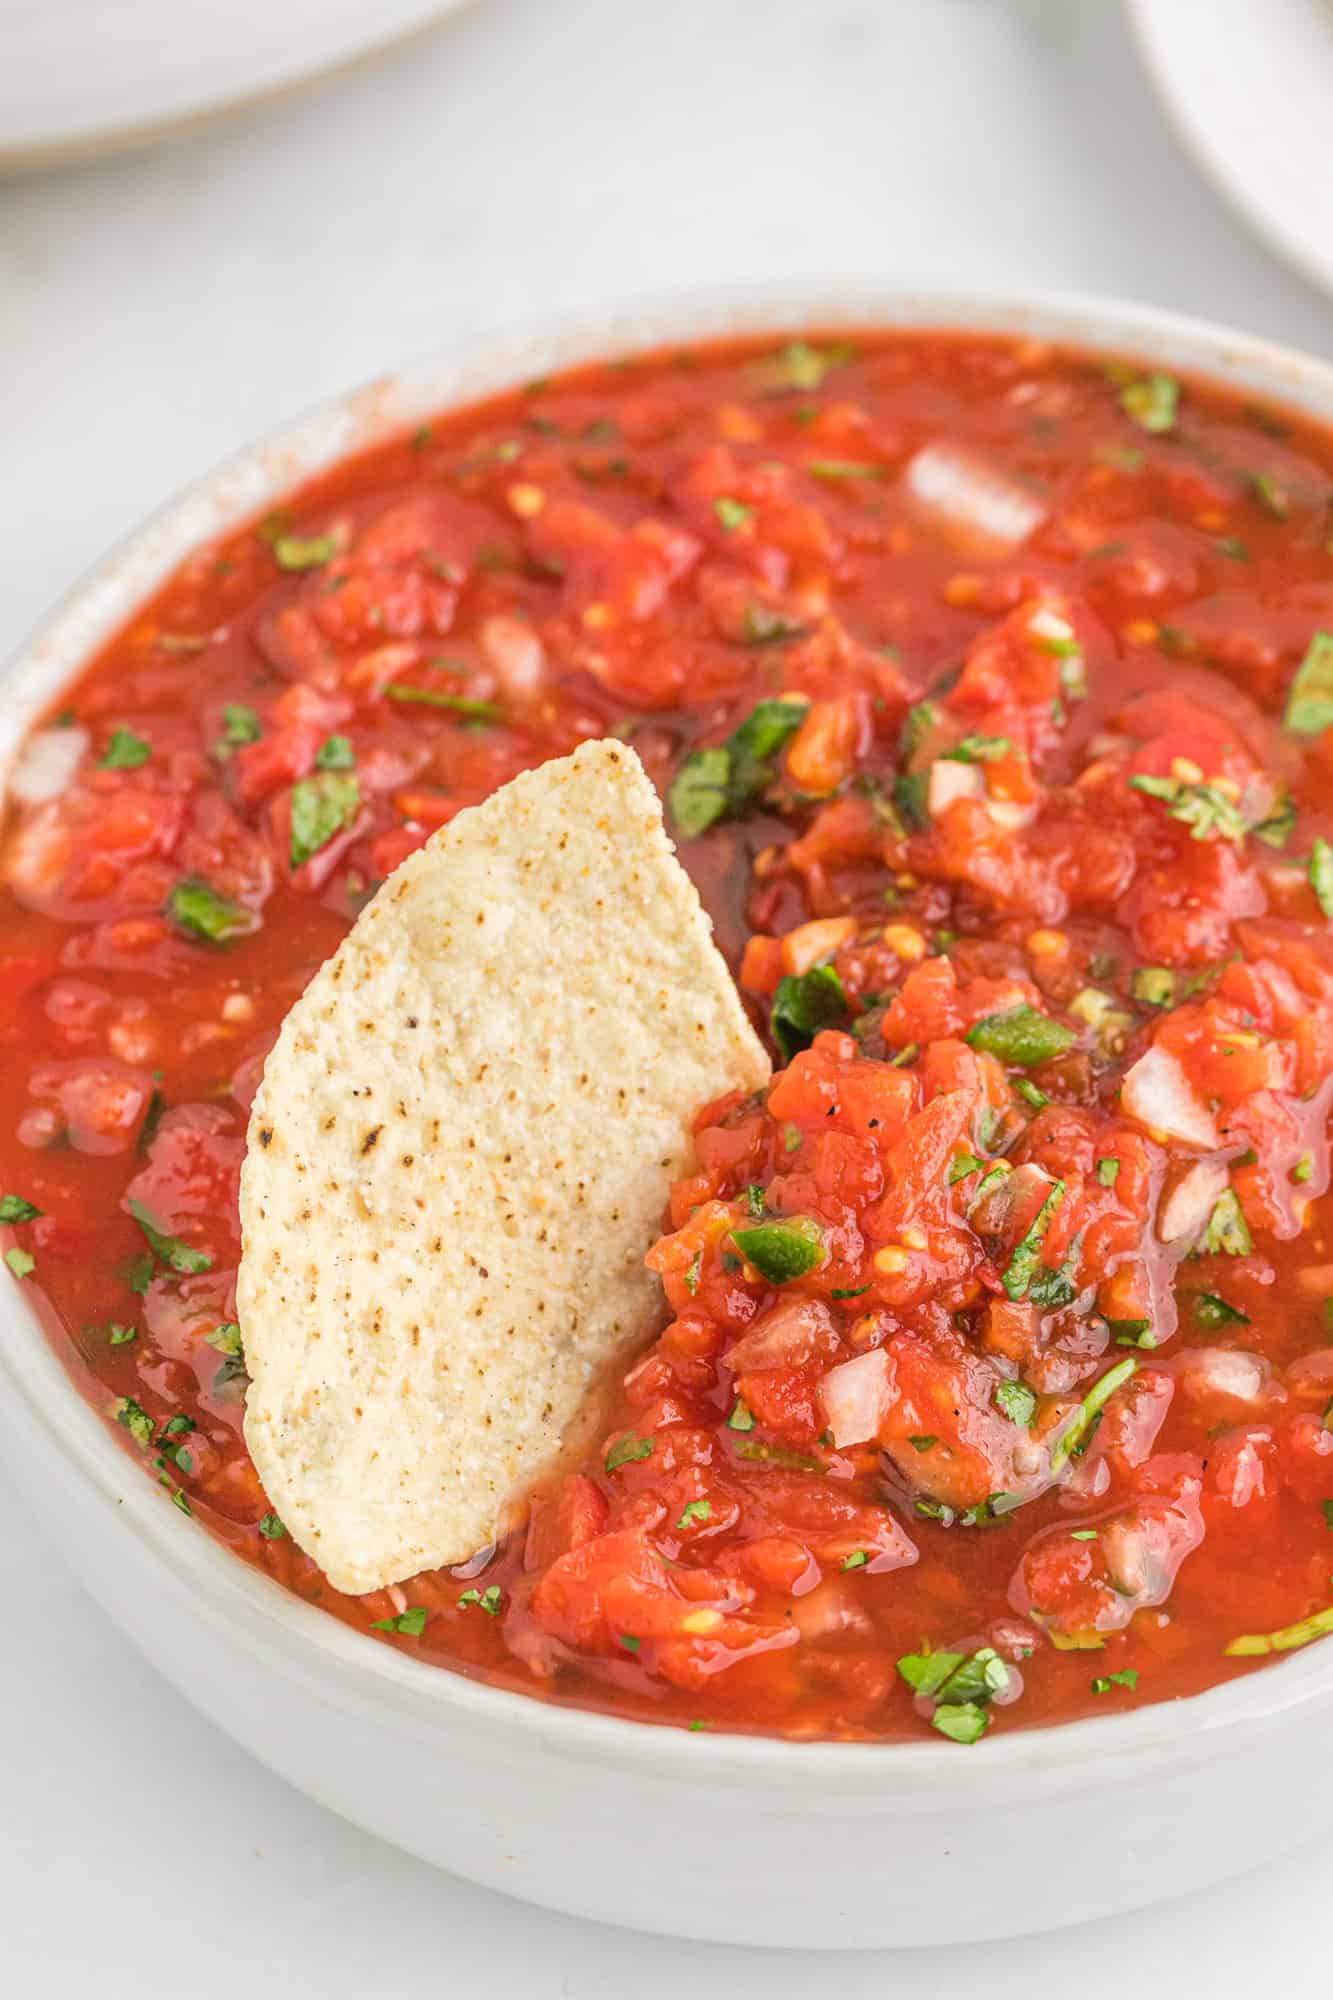 Large bowl of restaurant style salsa with one chip in it.